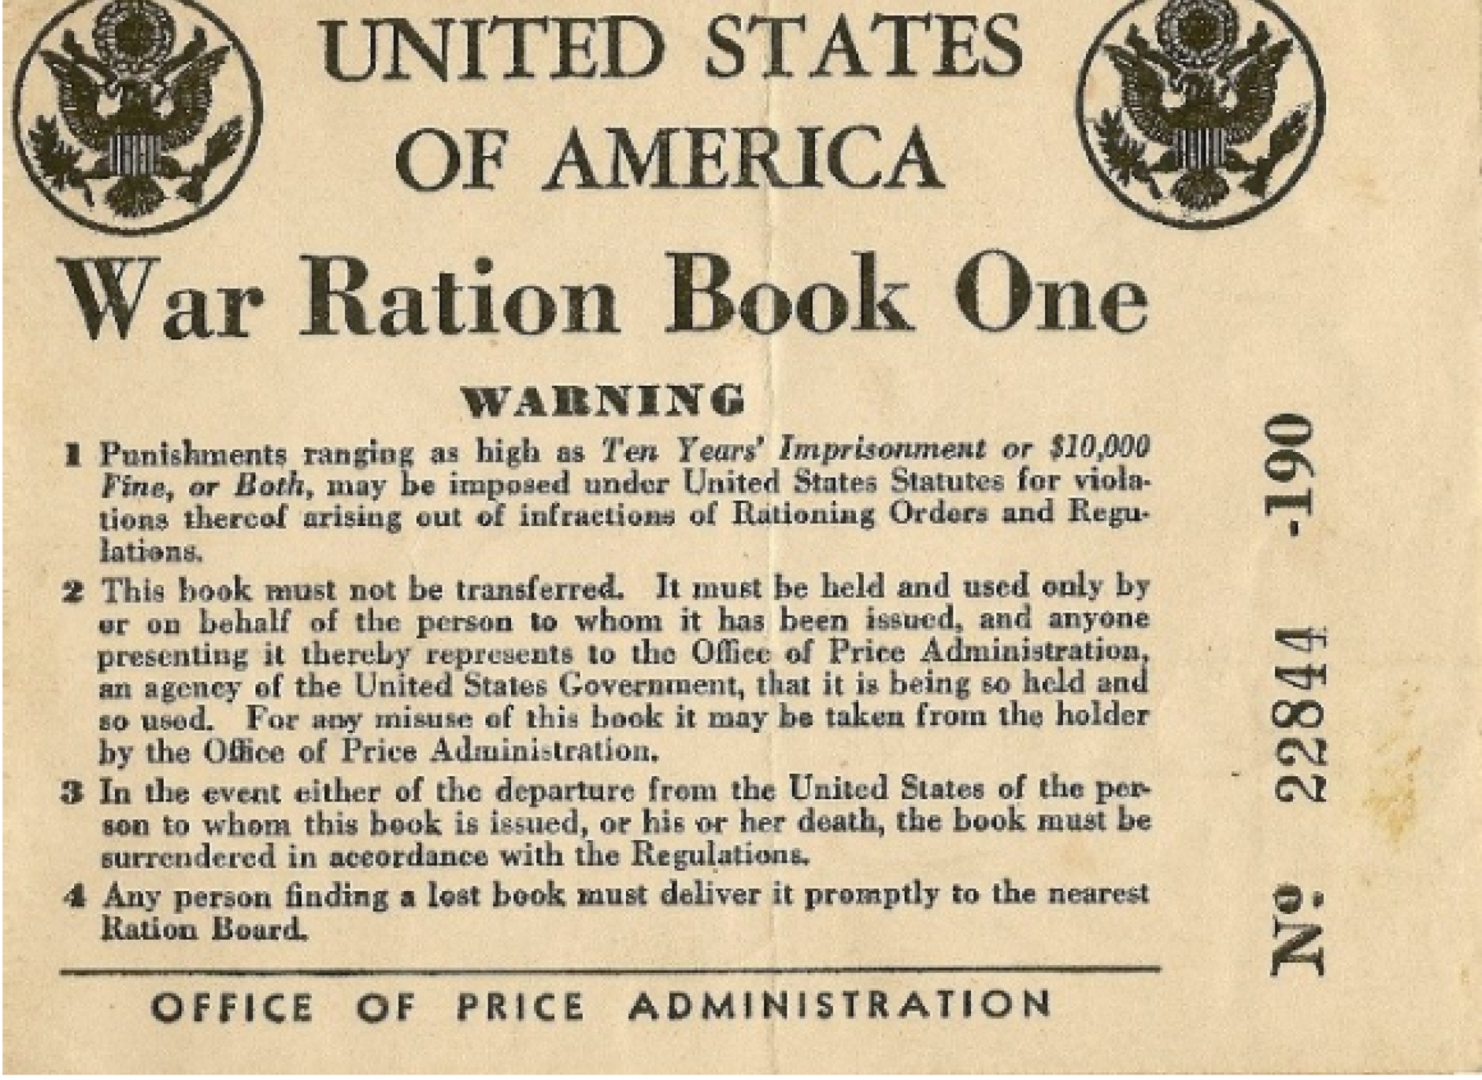 ration-book-one-front.png